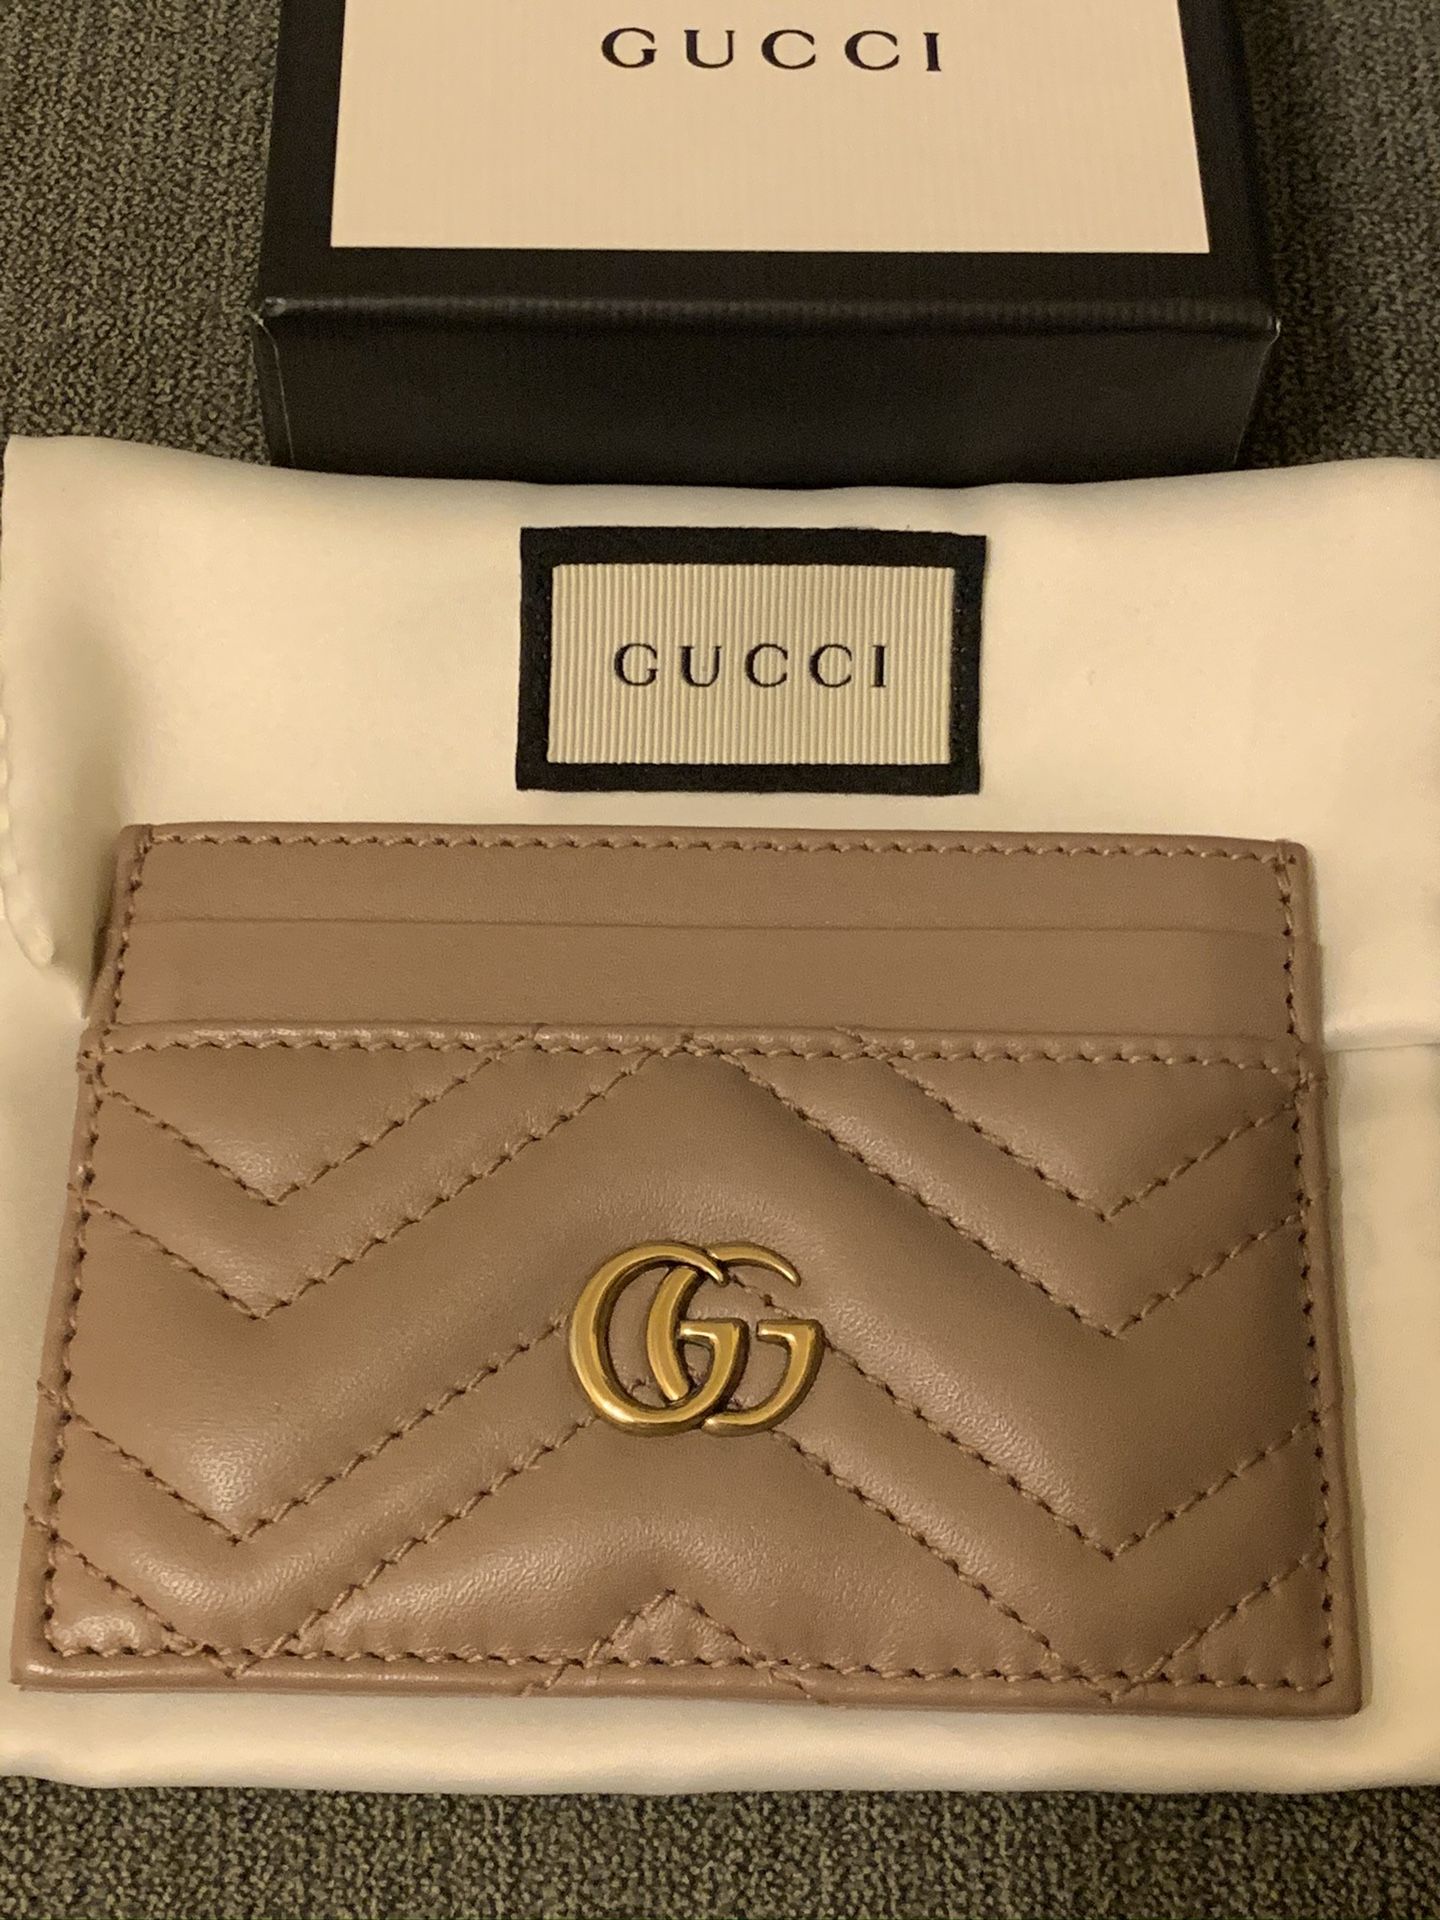 Preloved Gucci Marmont Card Case in Dusty Pink Leather